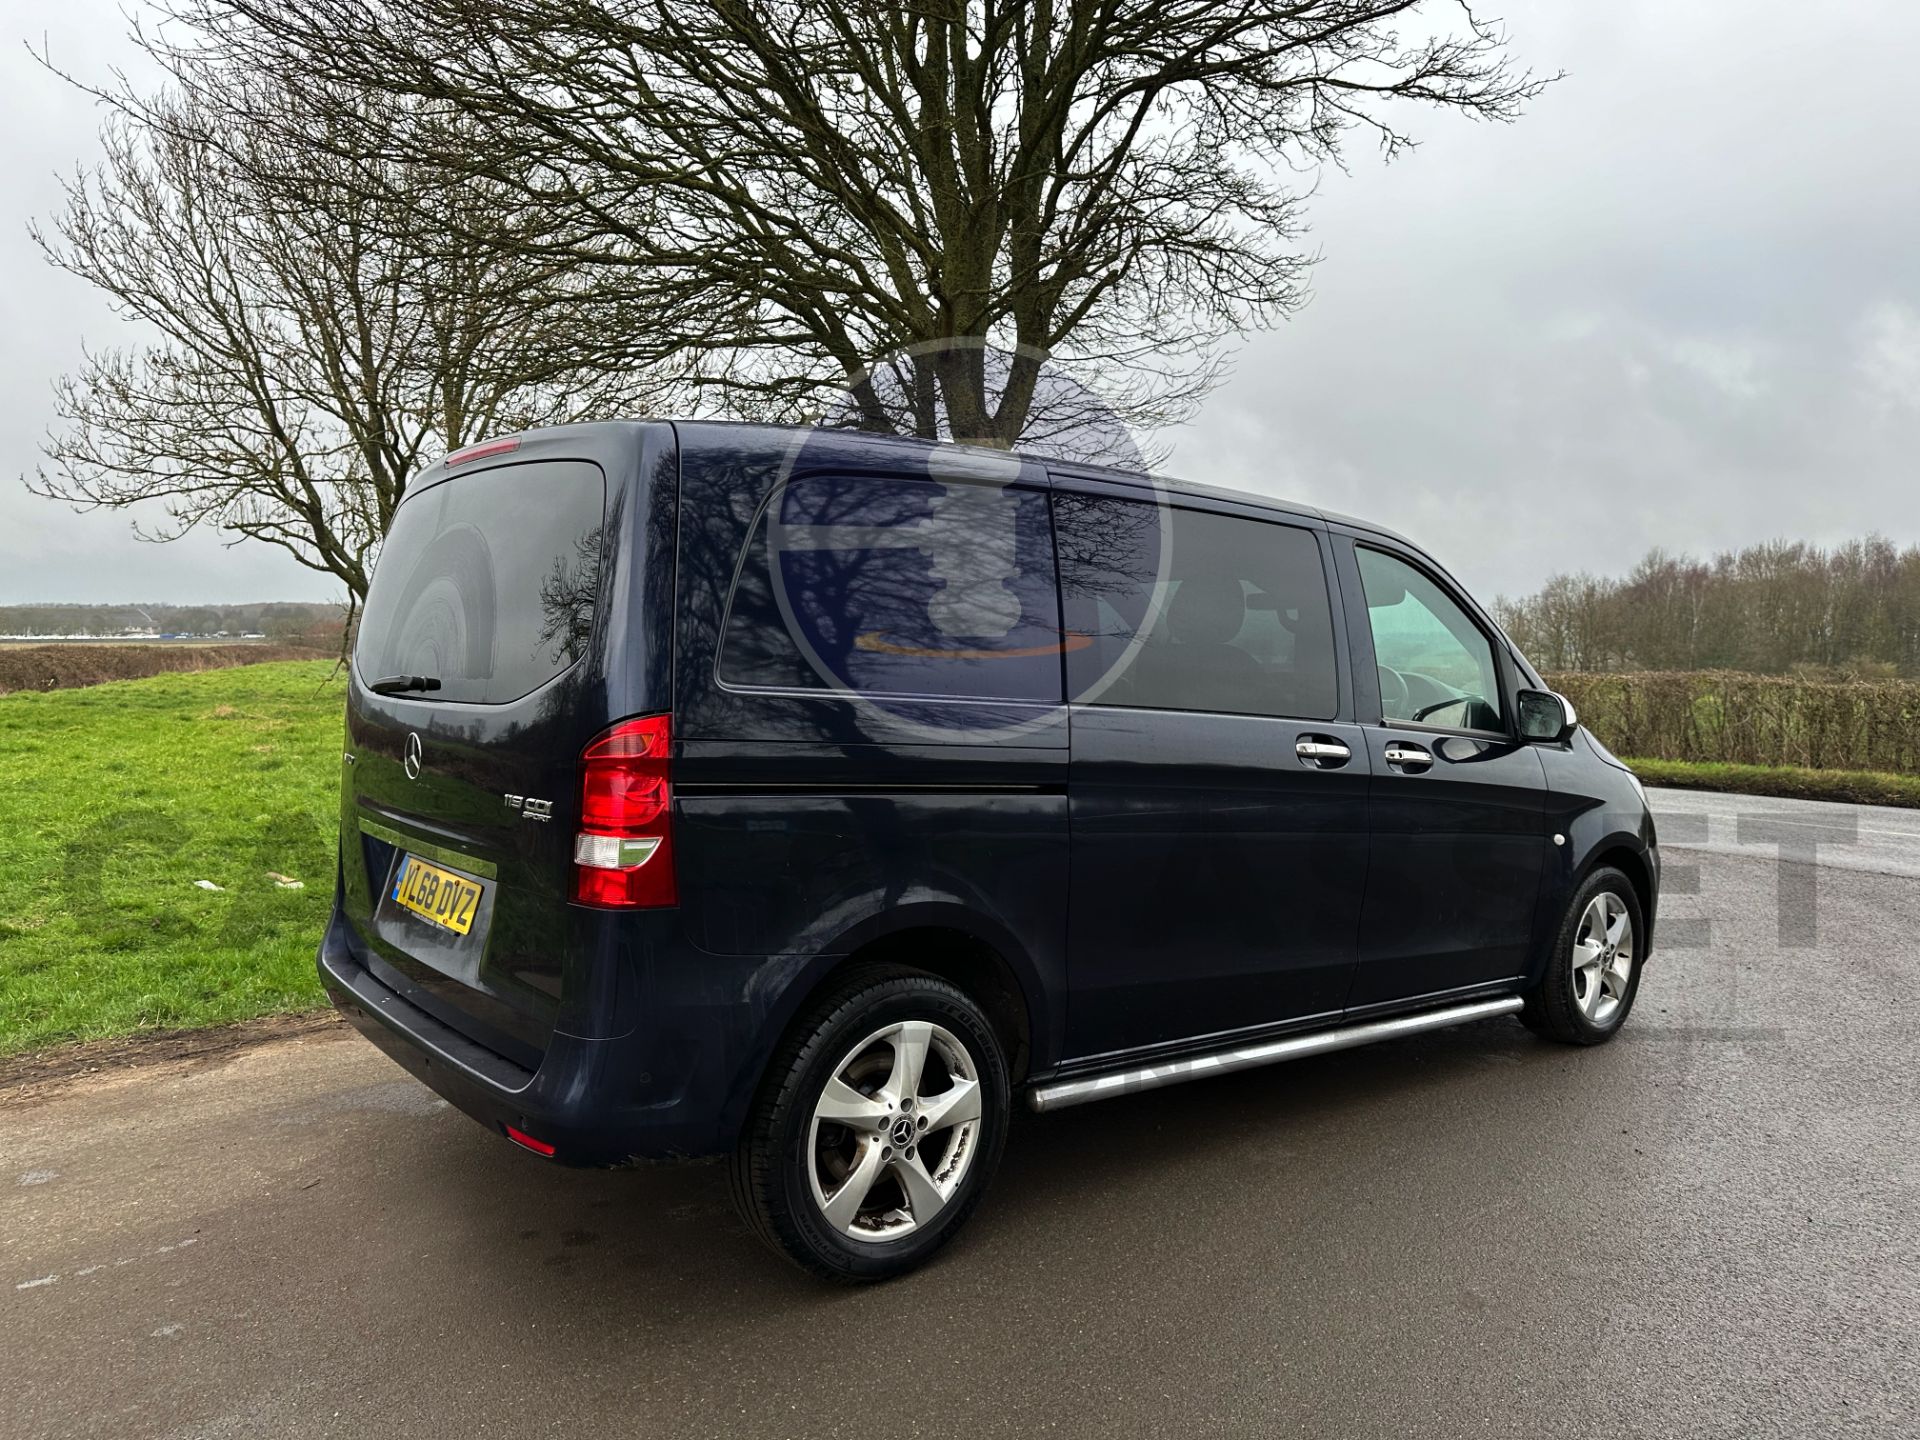 (ON SALE) MERCEDES-BENZ VITO 119 CDI AUTO *SWB - 5 SEATER DUALINER* (2019 - EURO 6) *SPORT EDITION* - Image 12 of 44